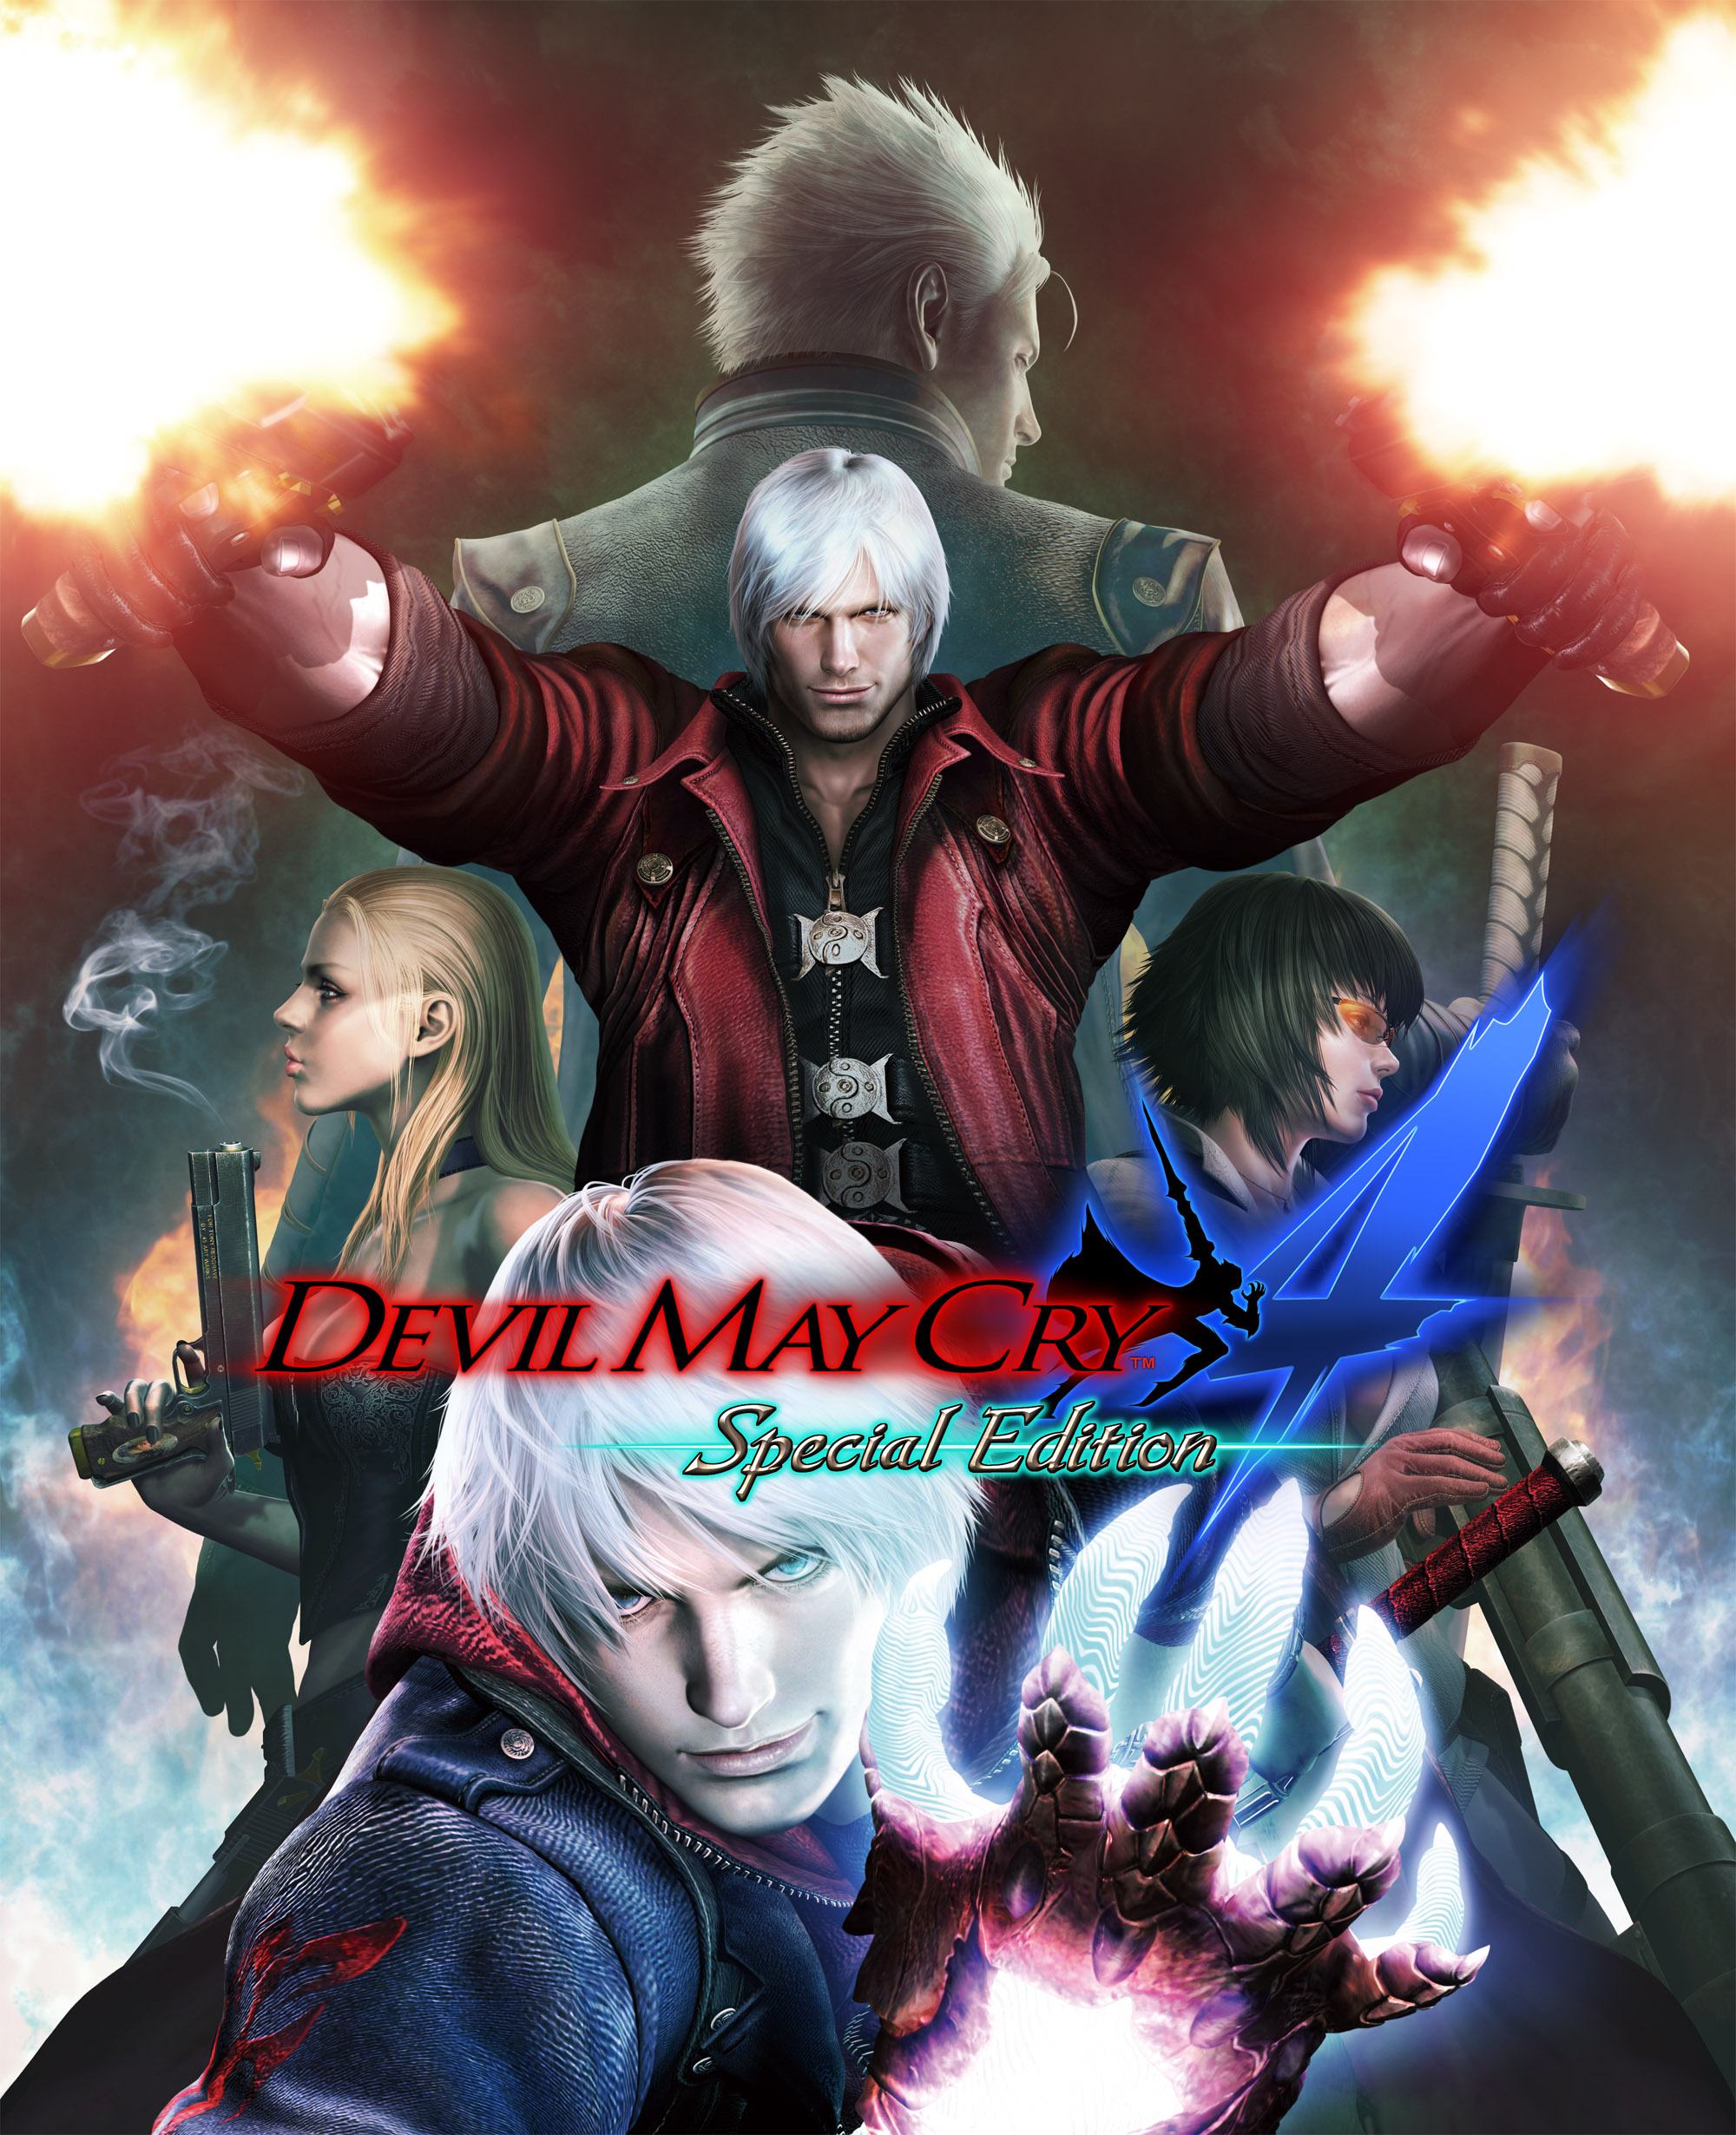 Devil-May-Cry-4-Special-Edition_2015_03-23-15_014.jpg